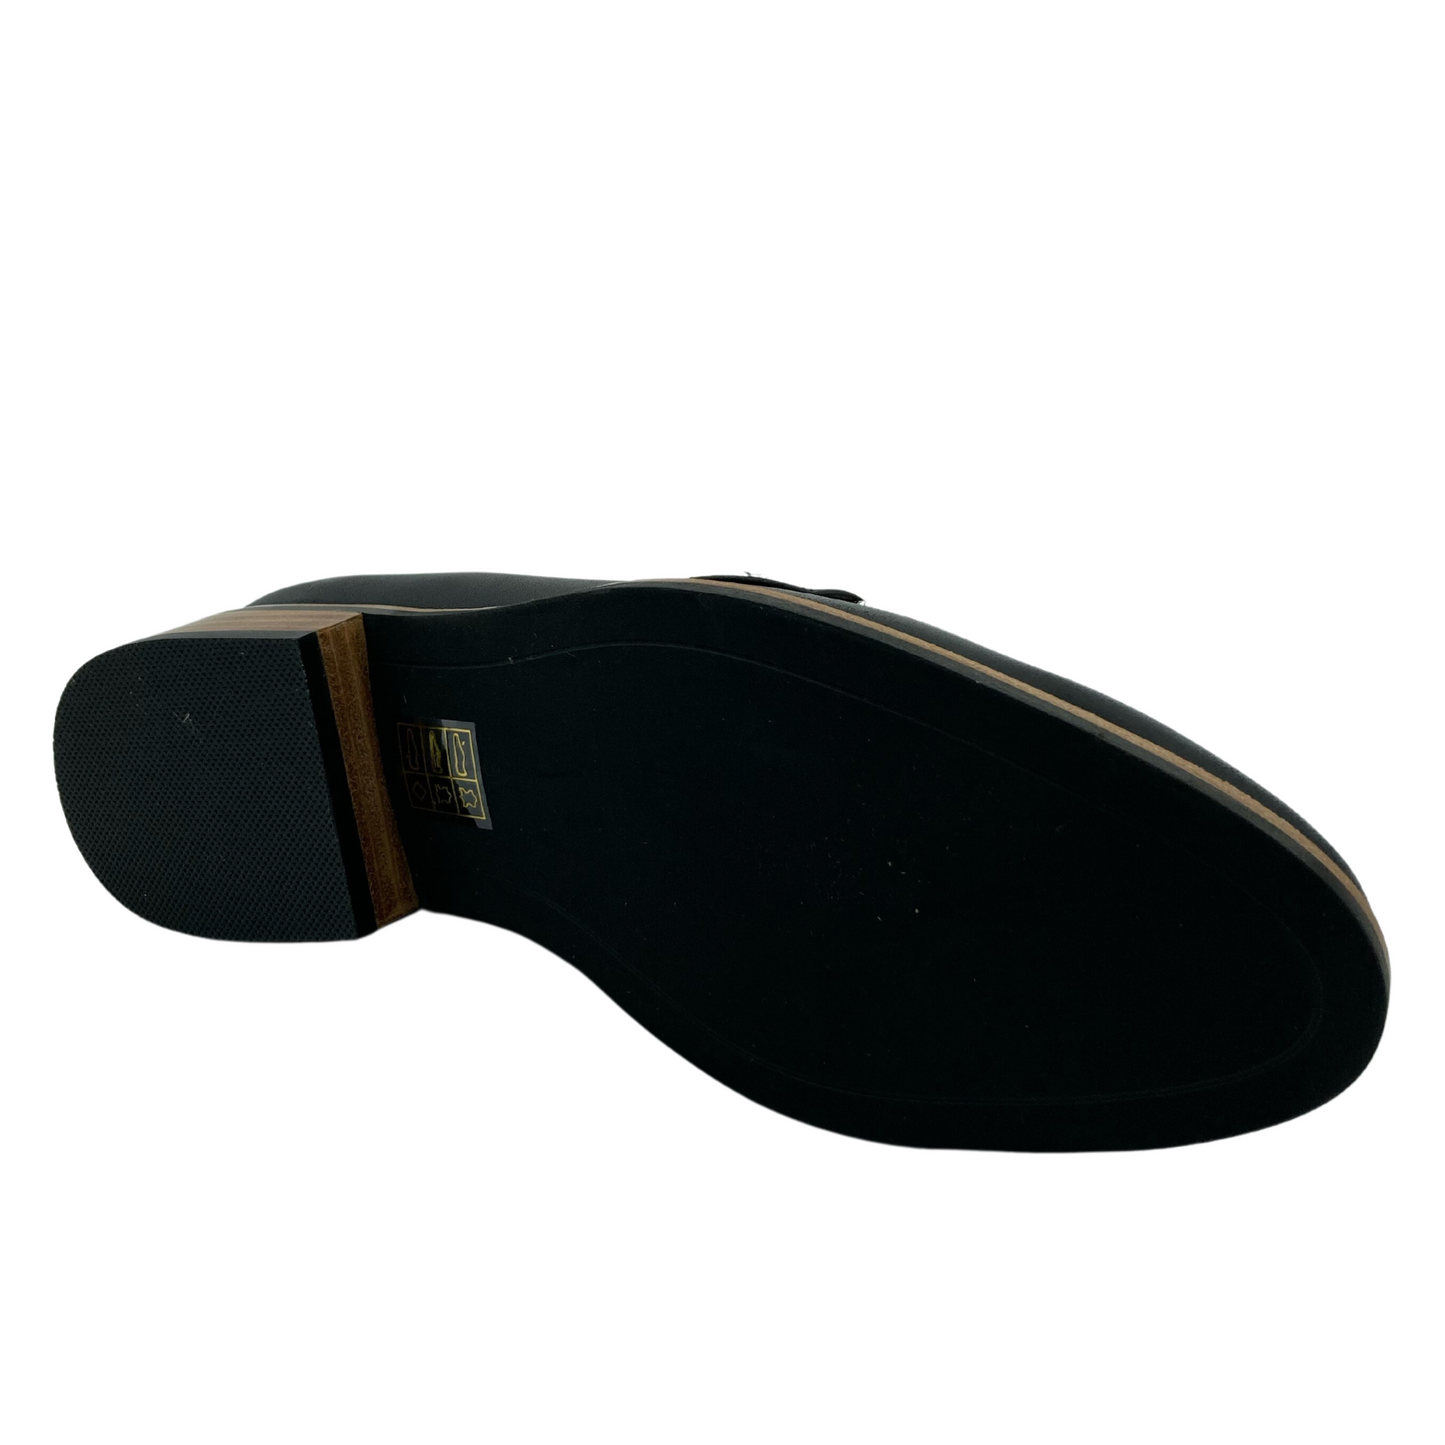 Sole view of leather loafer with black rubber bottom